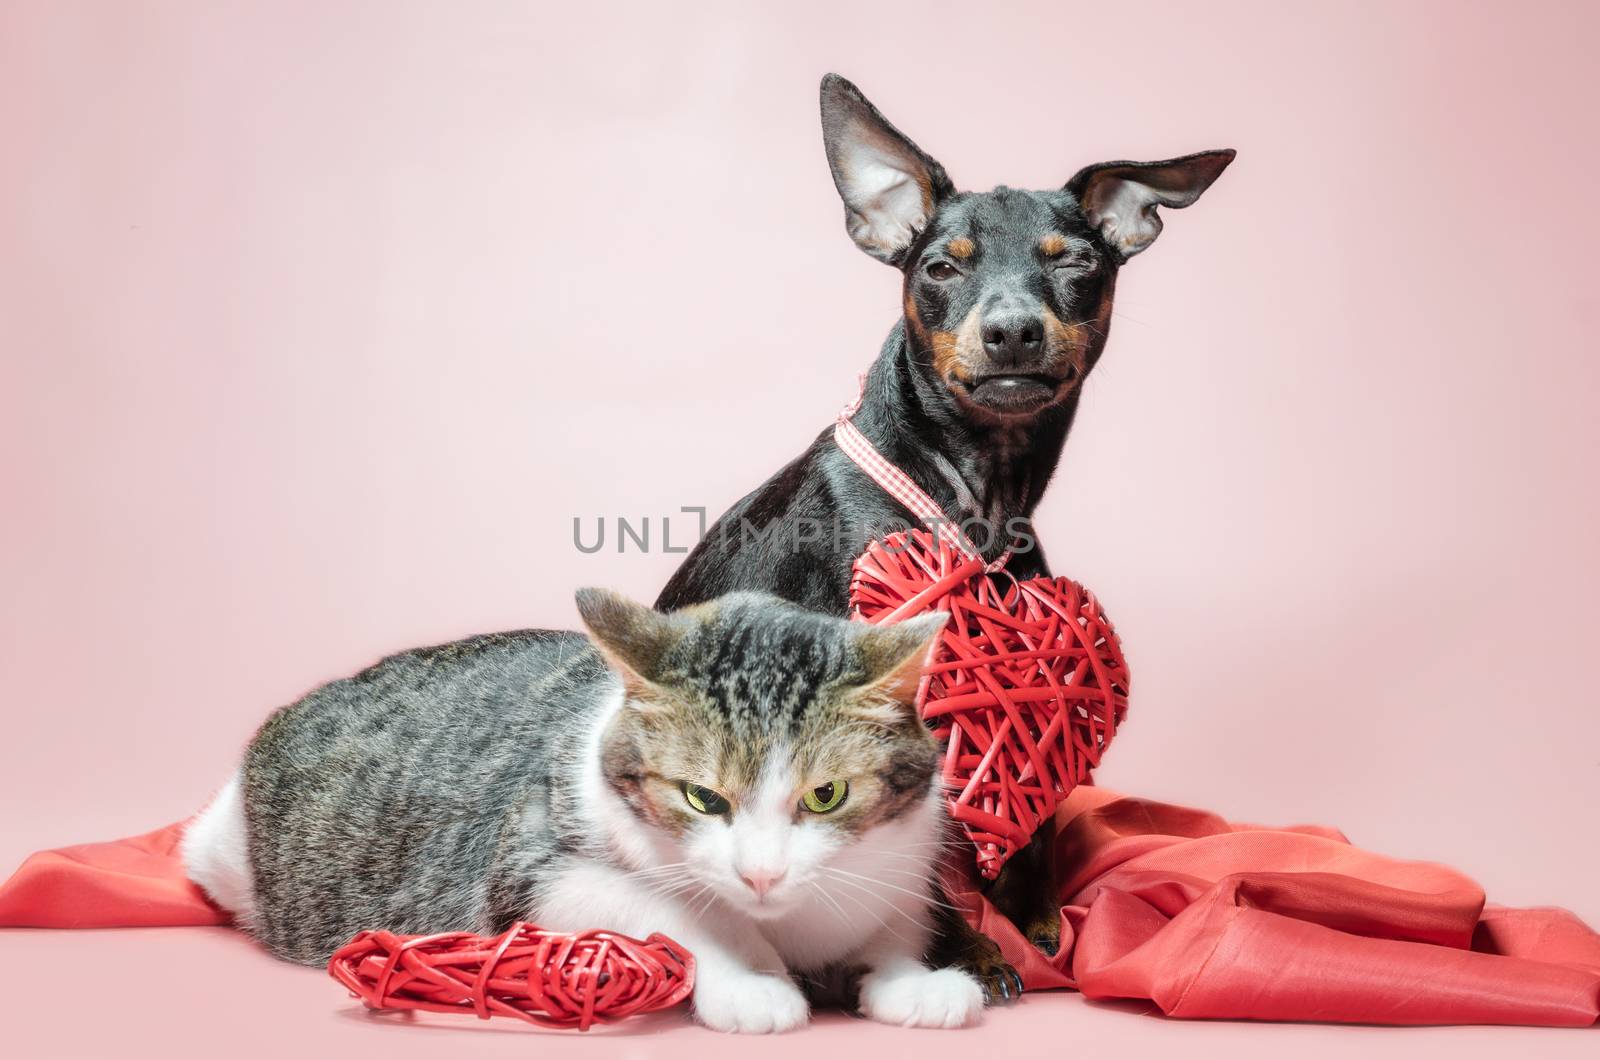 cunning miniature pinscher puppy and displeased cat with valentines day decor close up